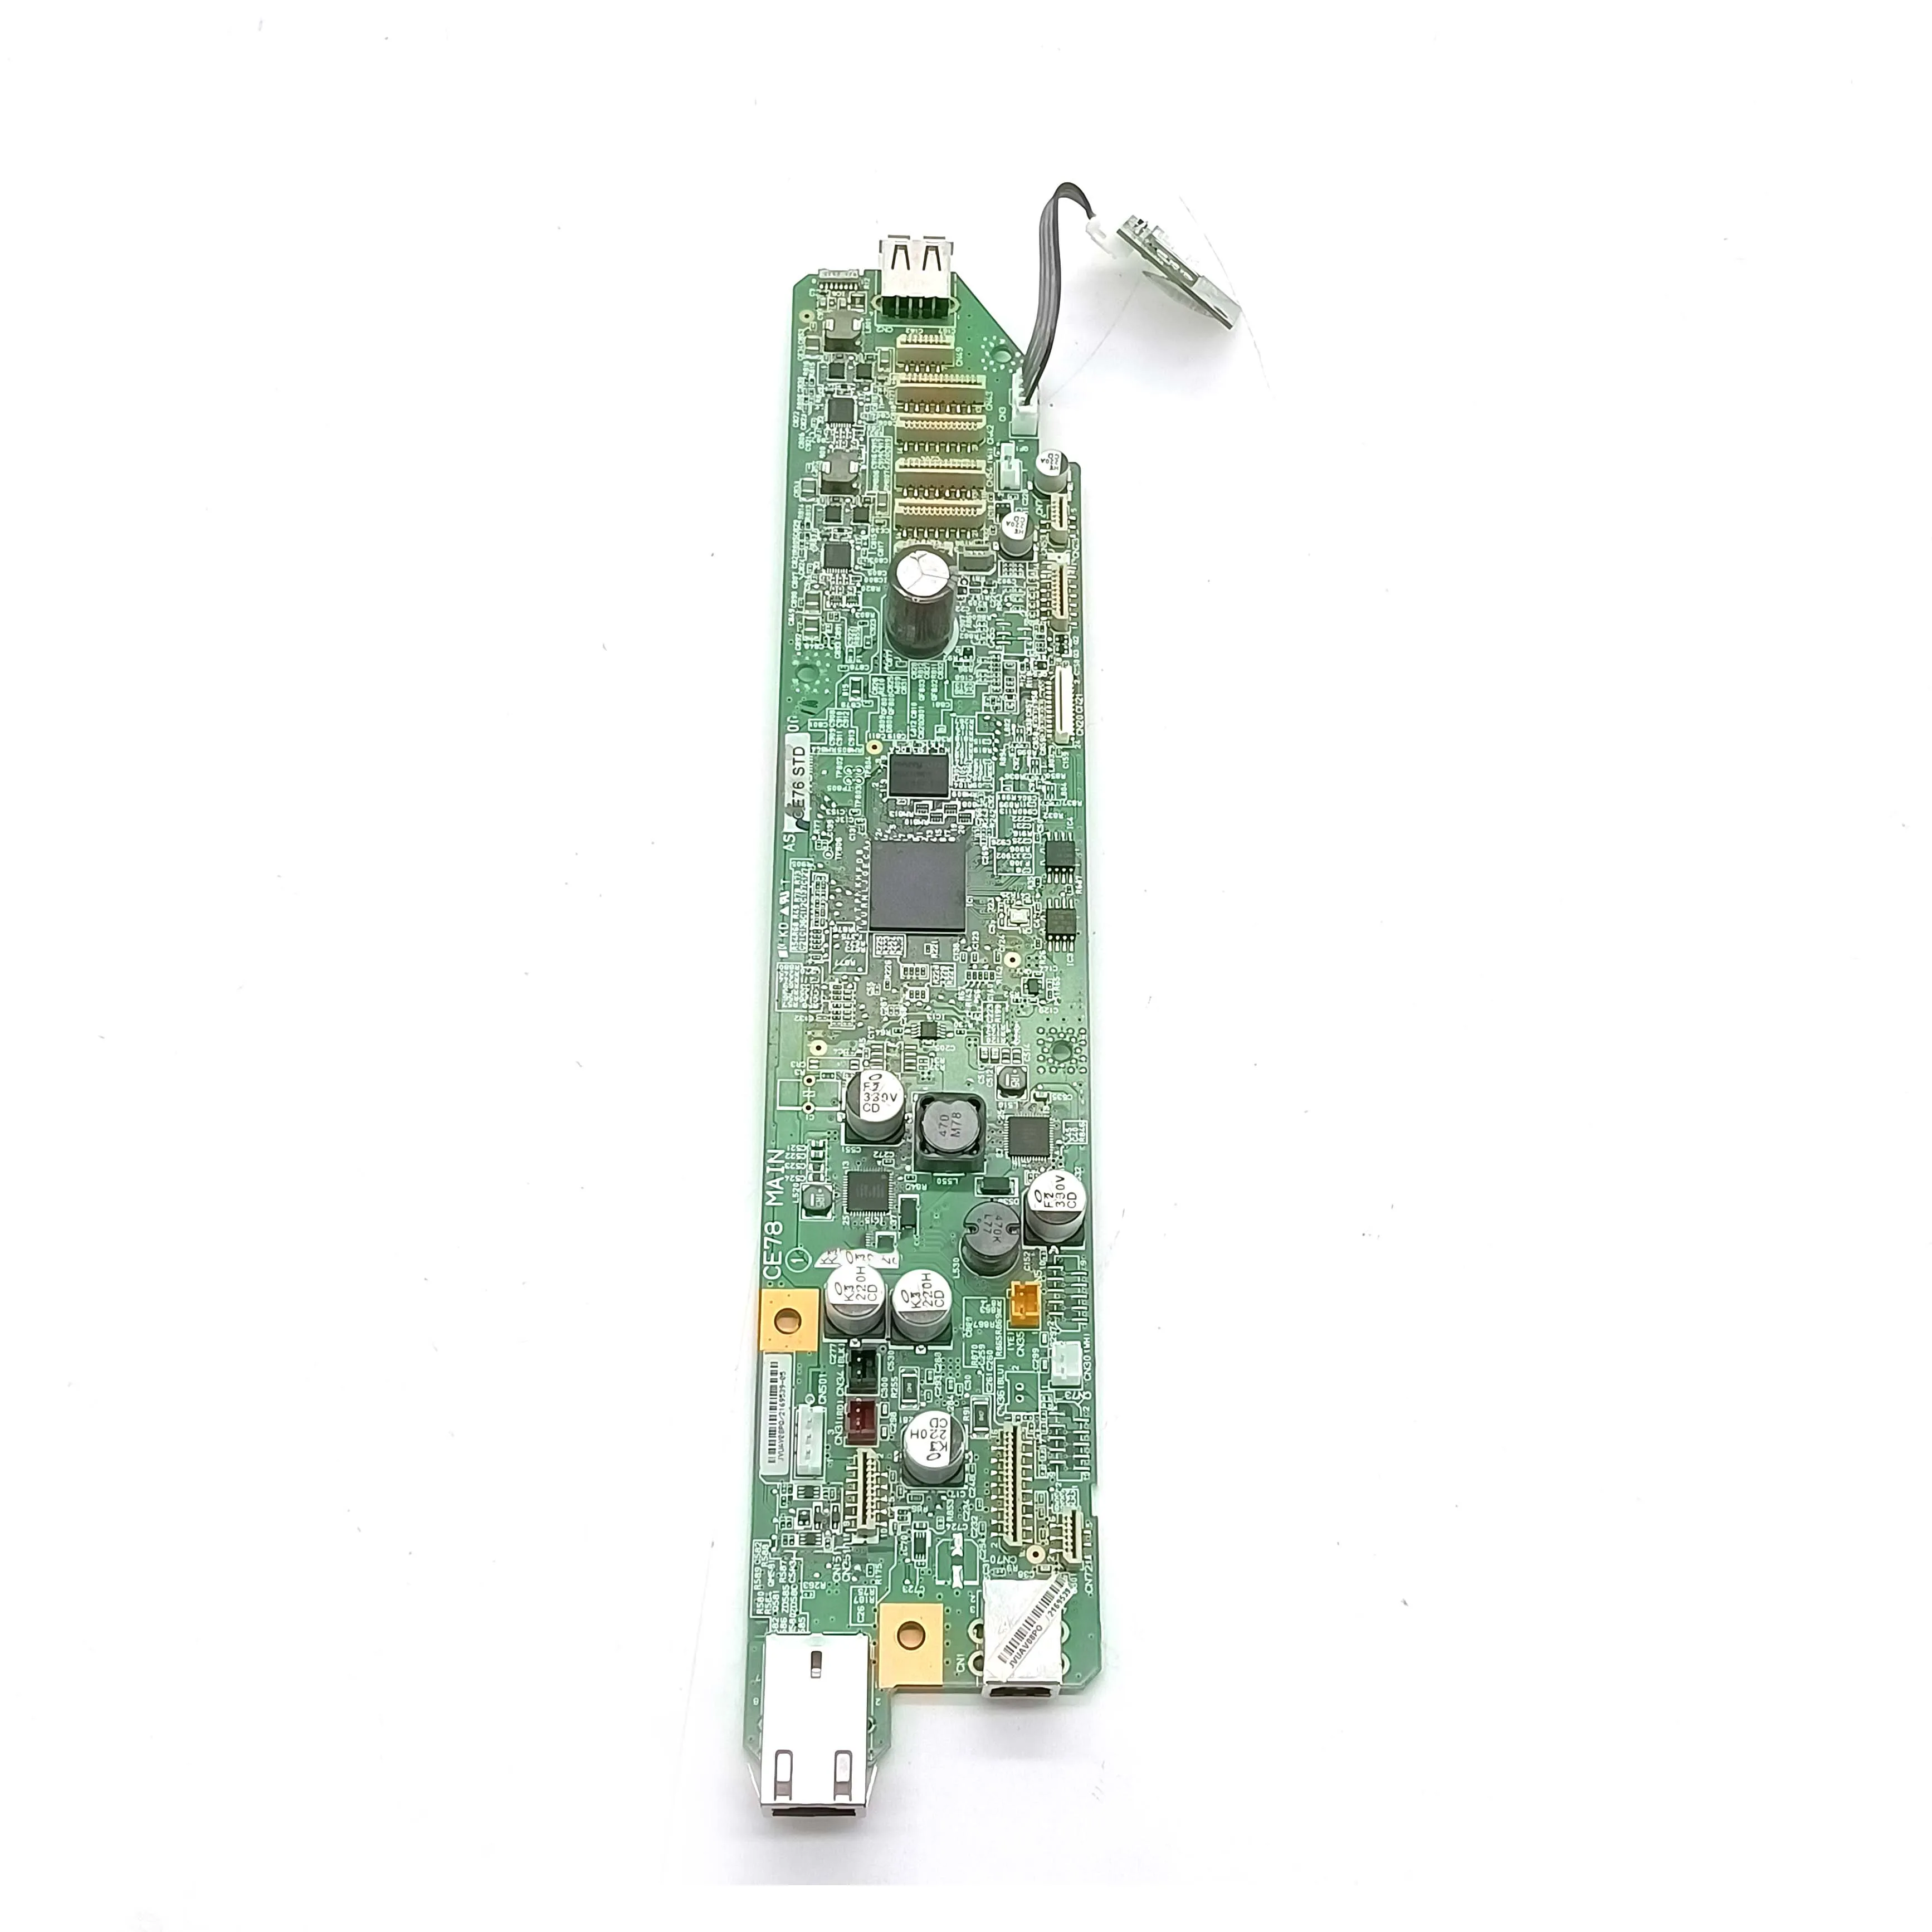 

Main Board Motherboard CE78 MAIN Fits For Epson 808 808AB